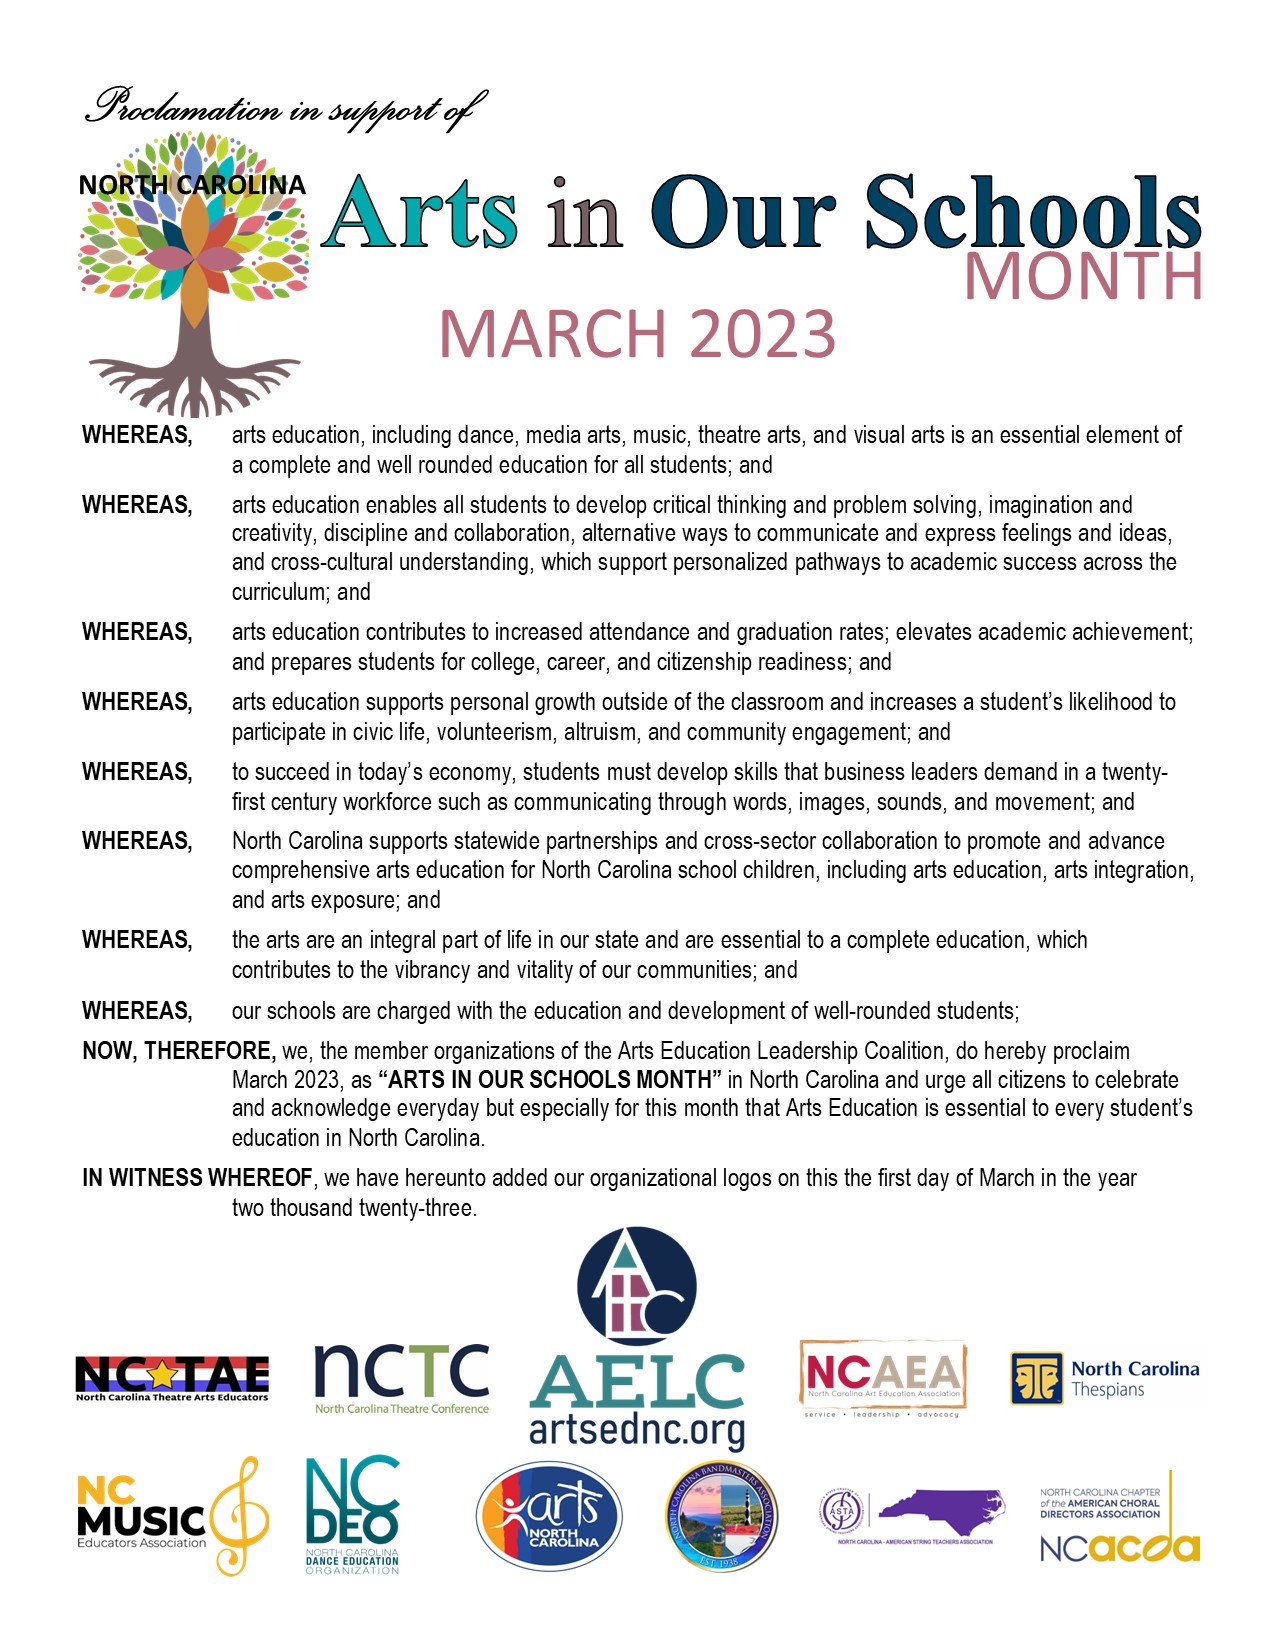 Art in Our Schools Month, March 2023, NC Art Education Leadership Coalition